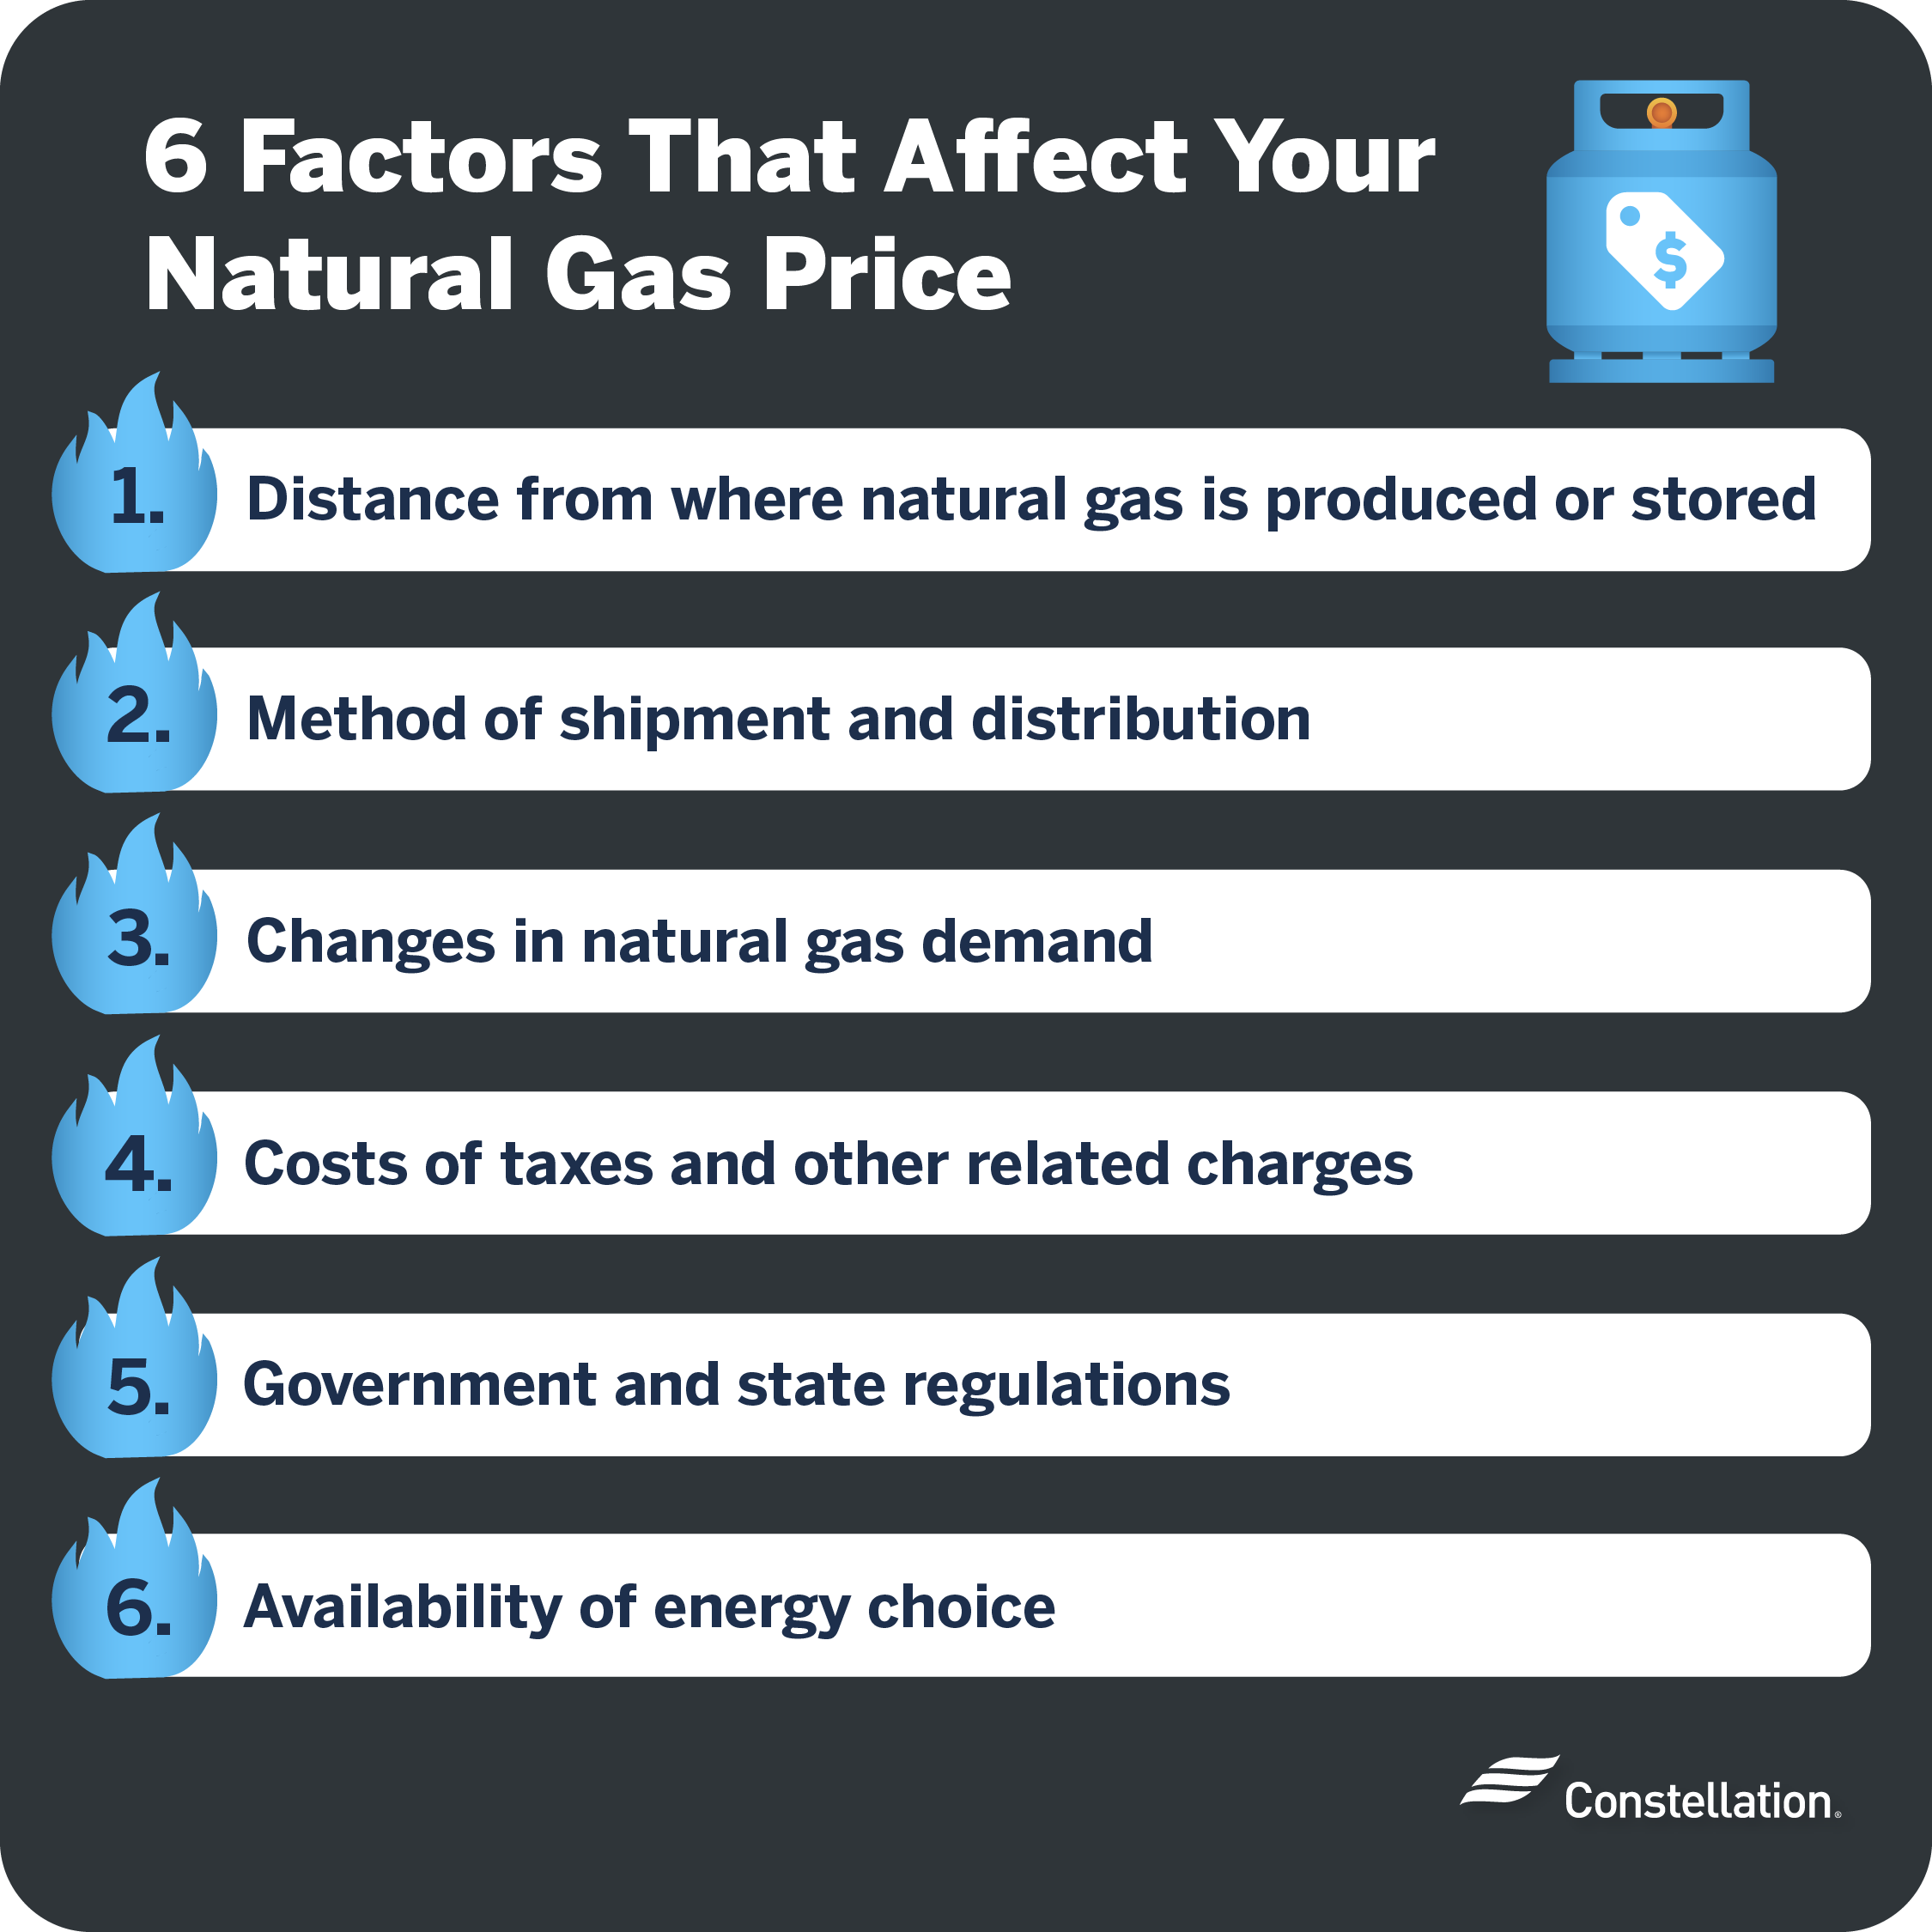 Factors that affect natural gas price.